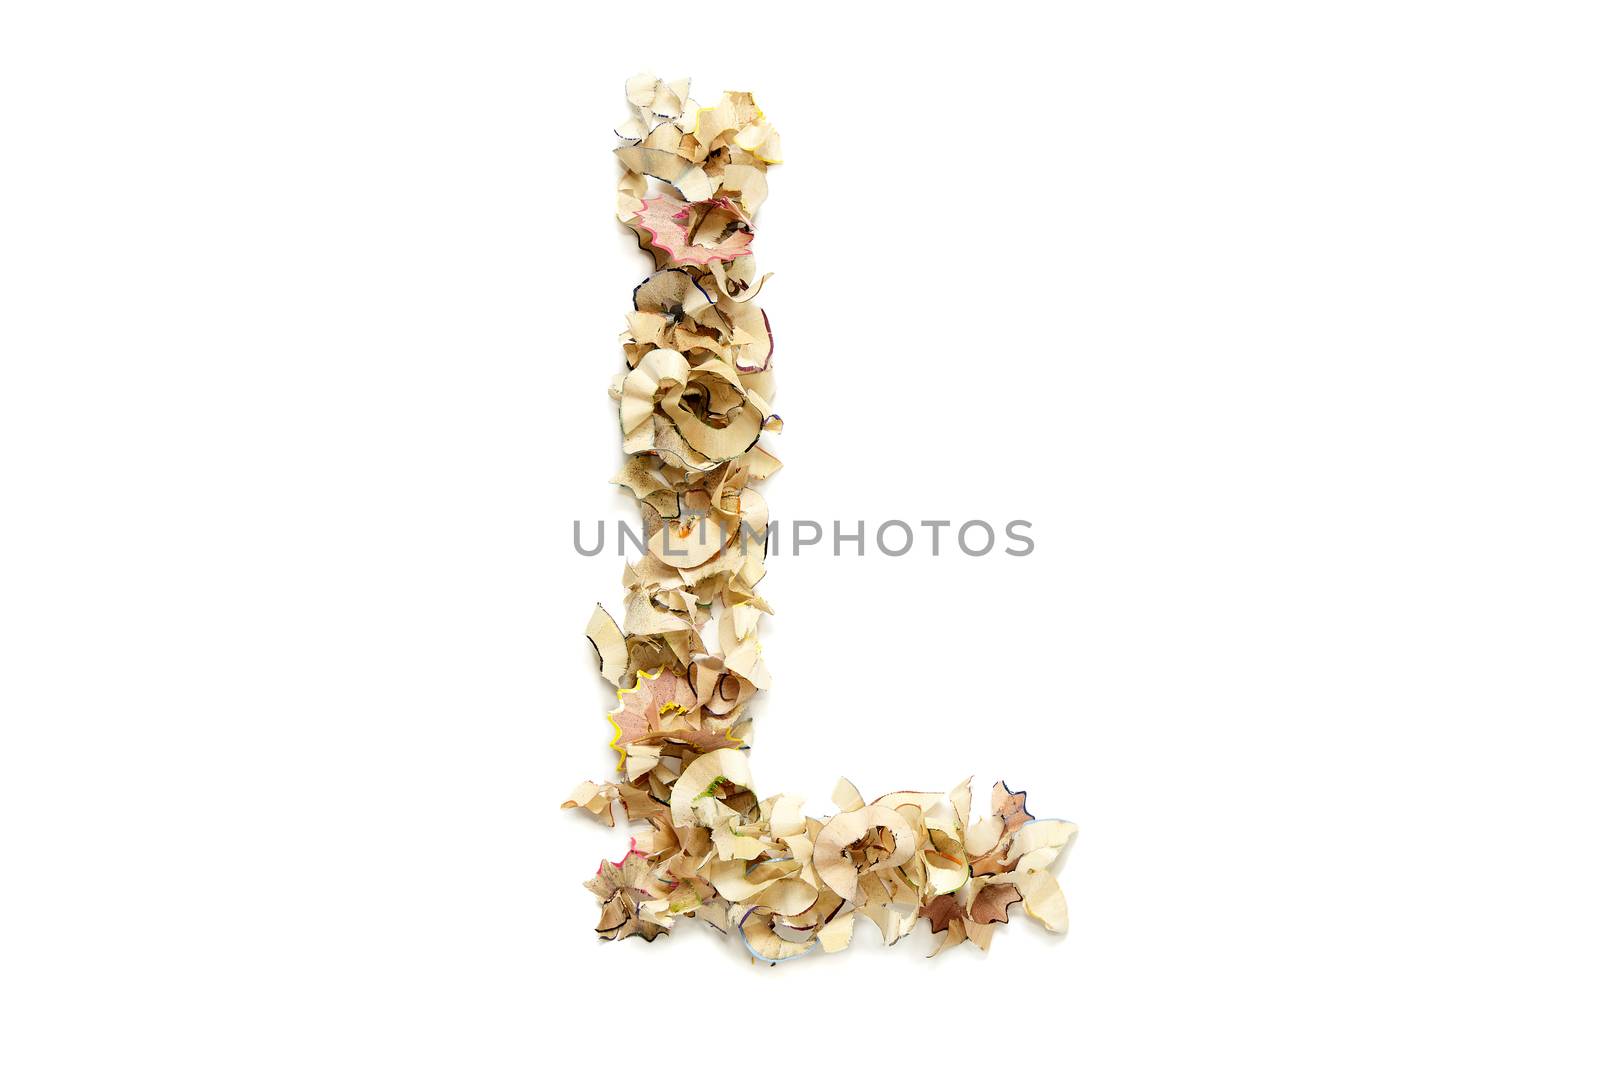 Letter L made from coloured pencil shavings for use in your design.